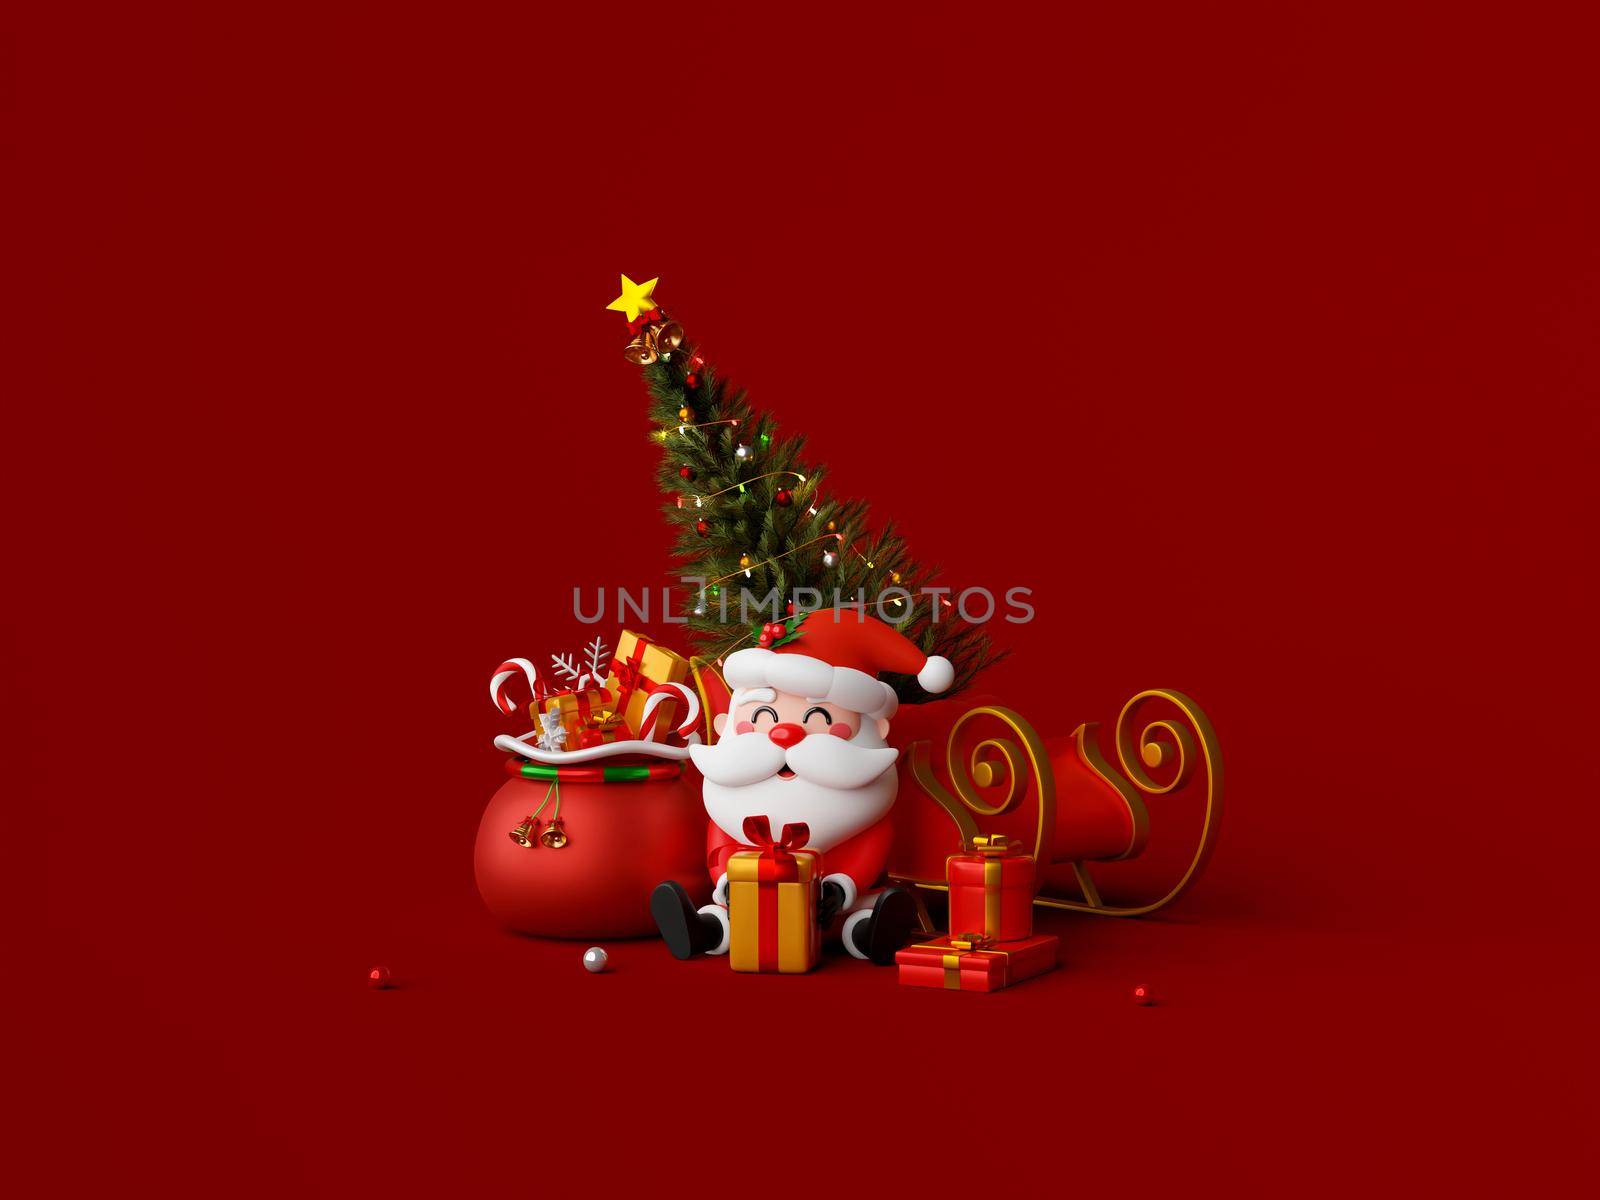 3d illustration of Santa Claus with sleigh and gift bag on red background